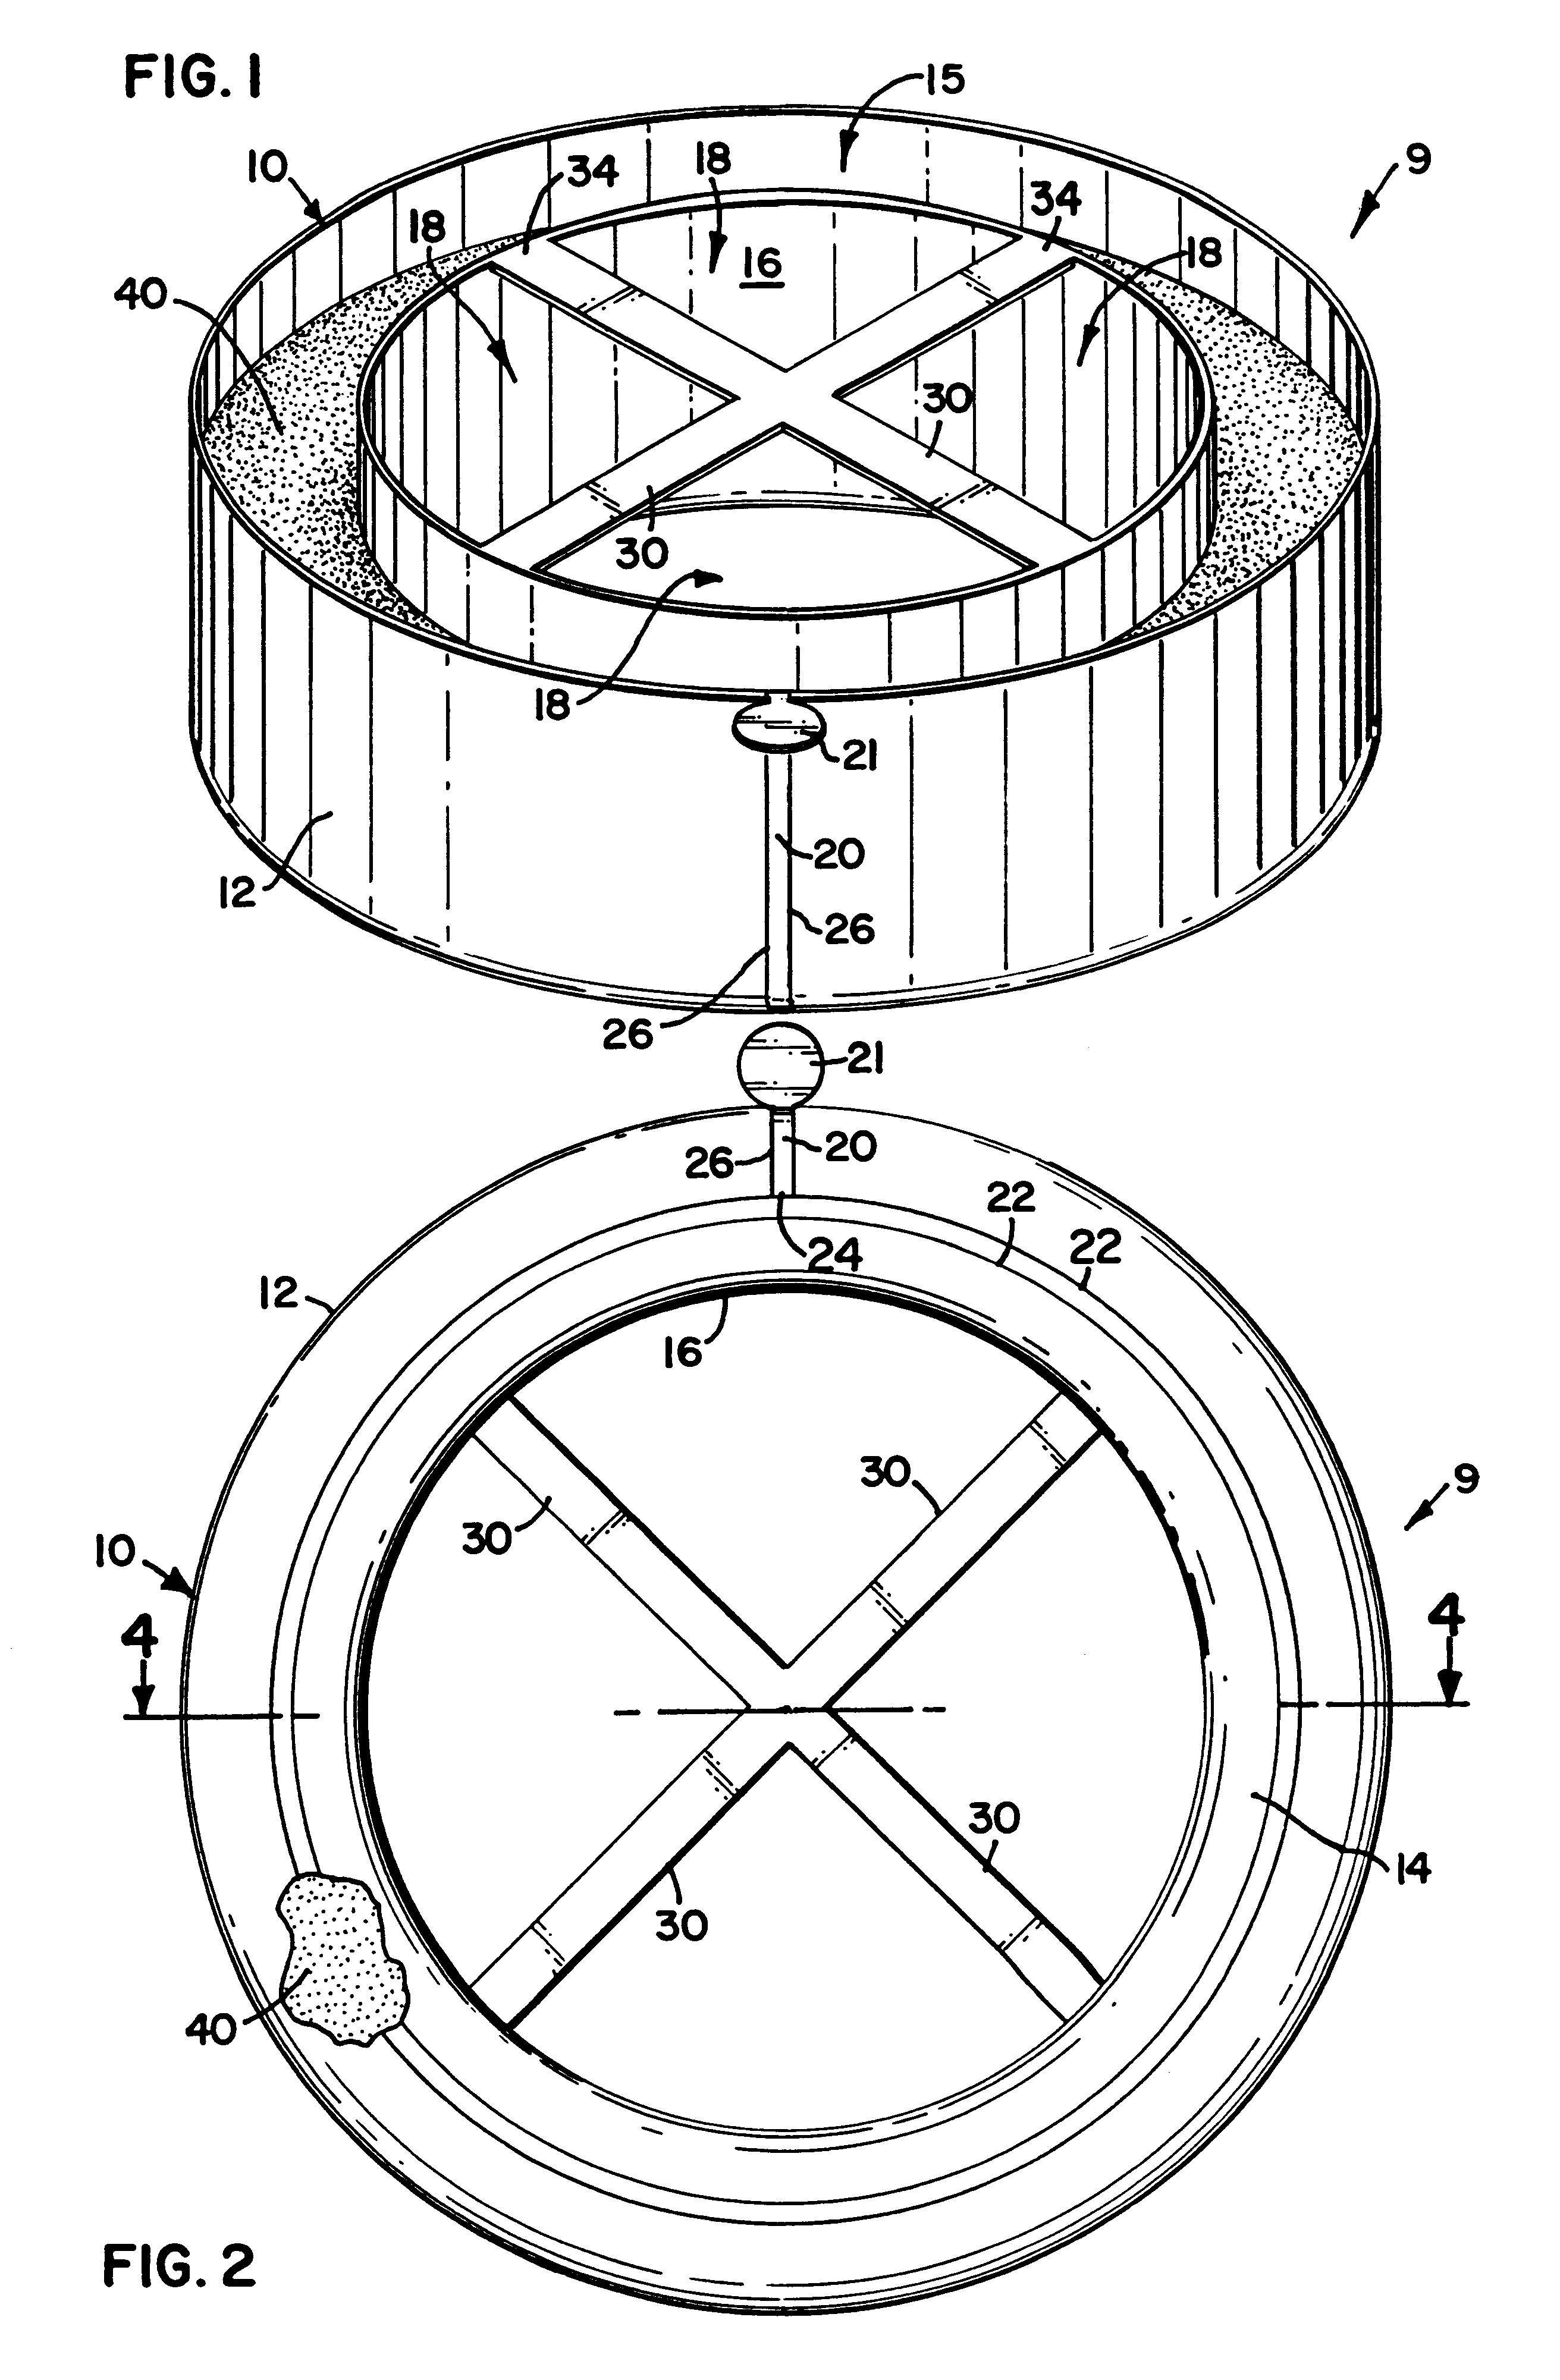 Drain treatment product and method of use